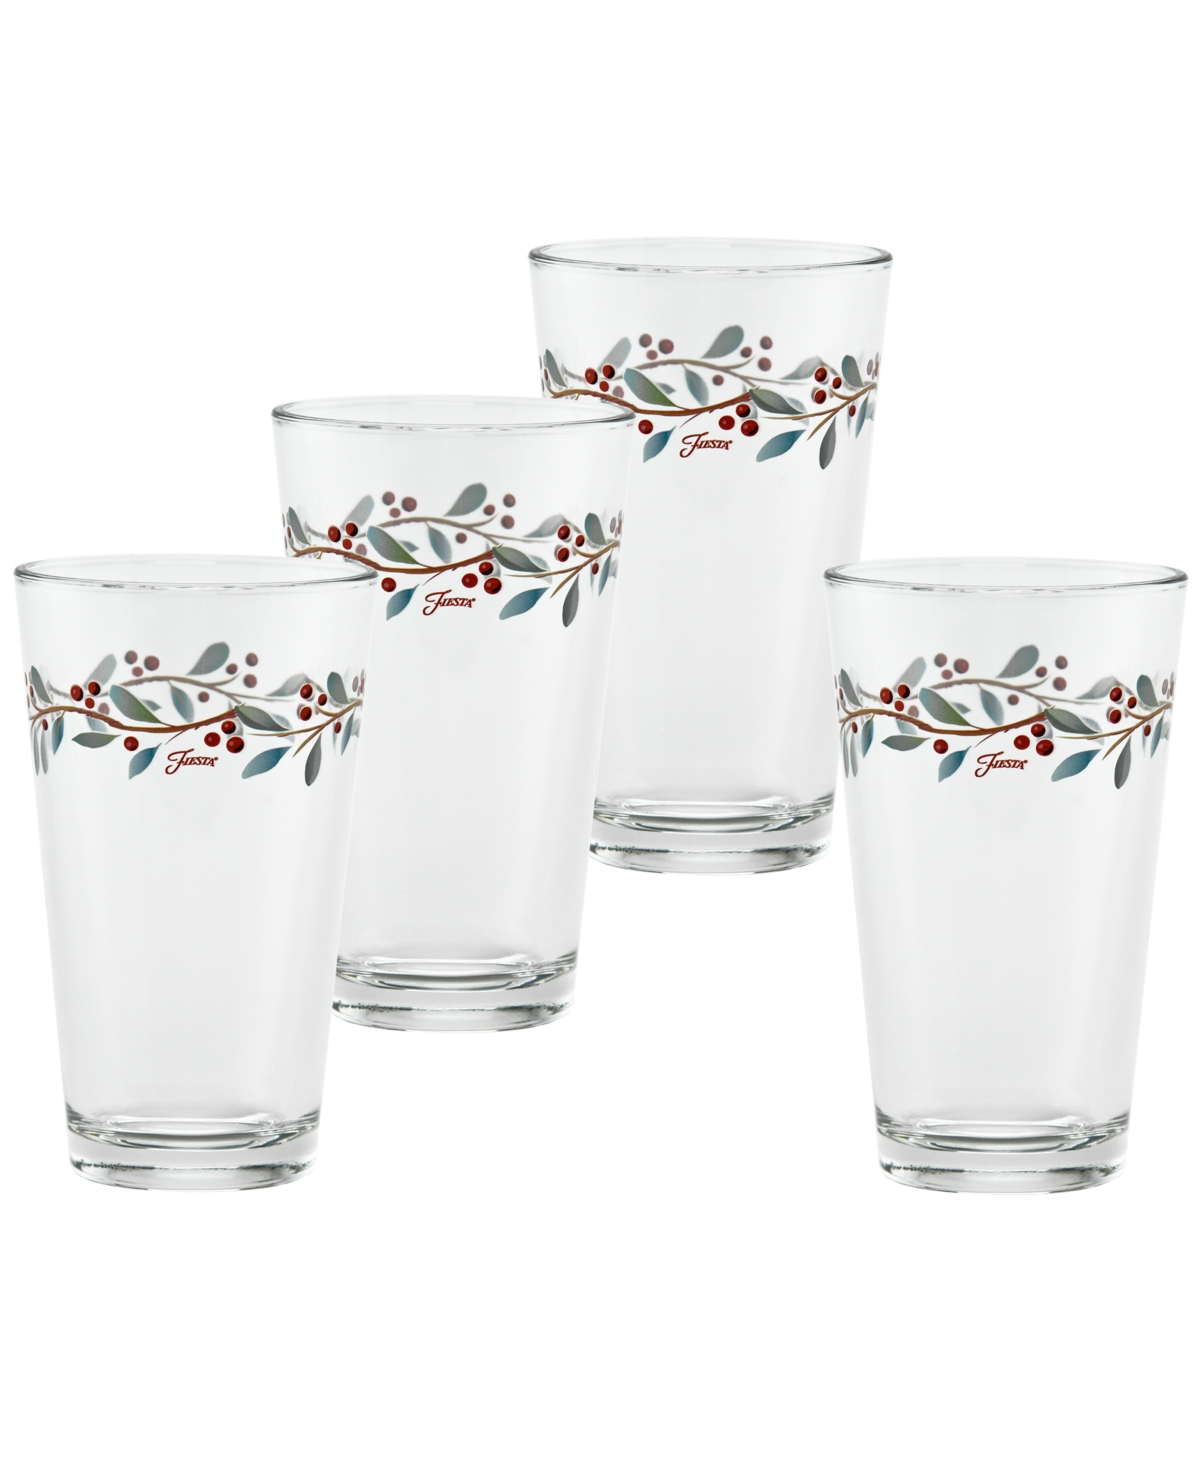 Fiesta Nutcracker Holly Tapered Cooler Glasses, Set Of 4 In Red,green